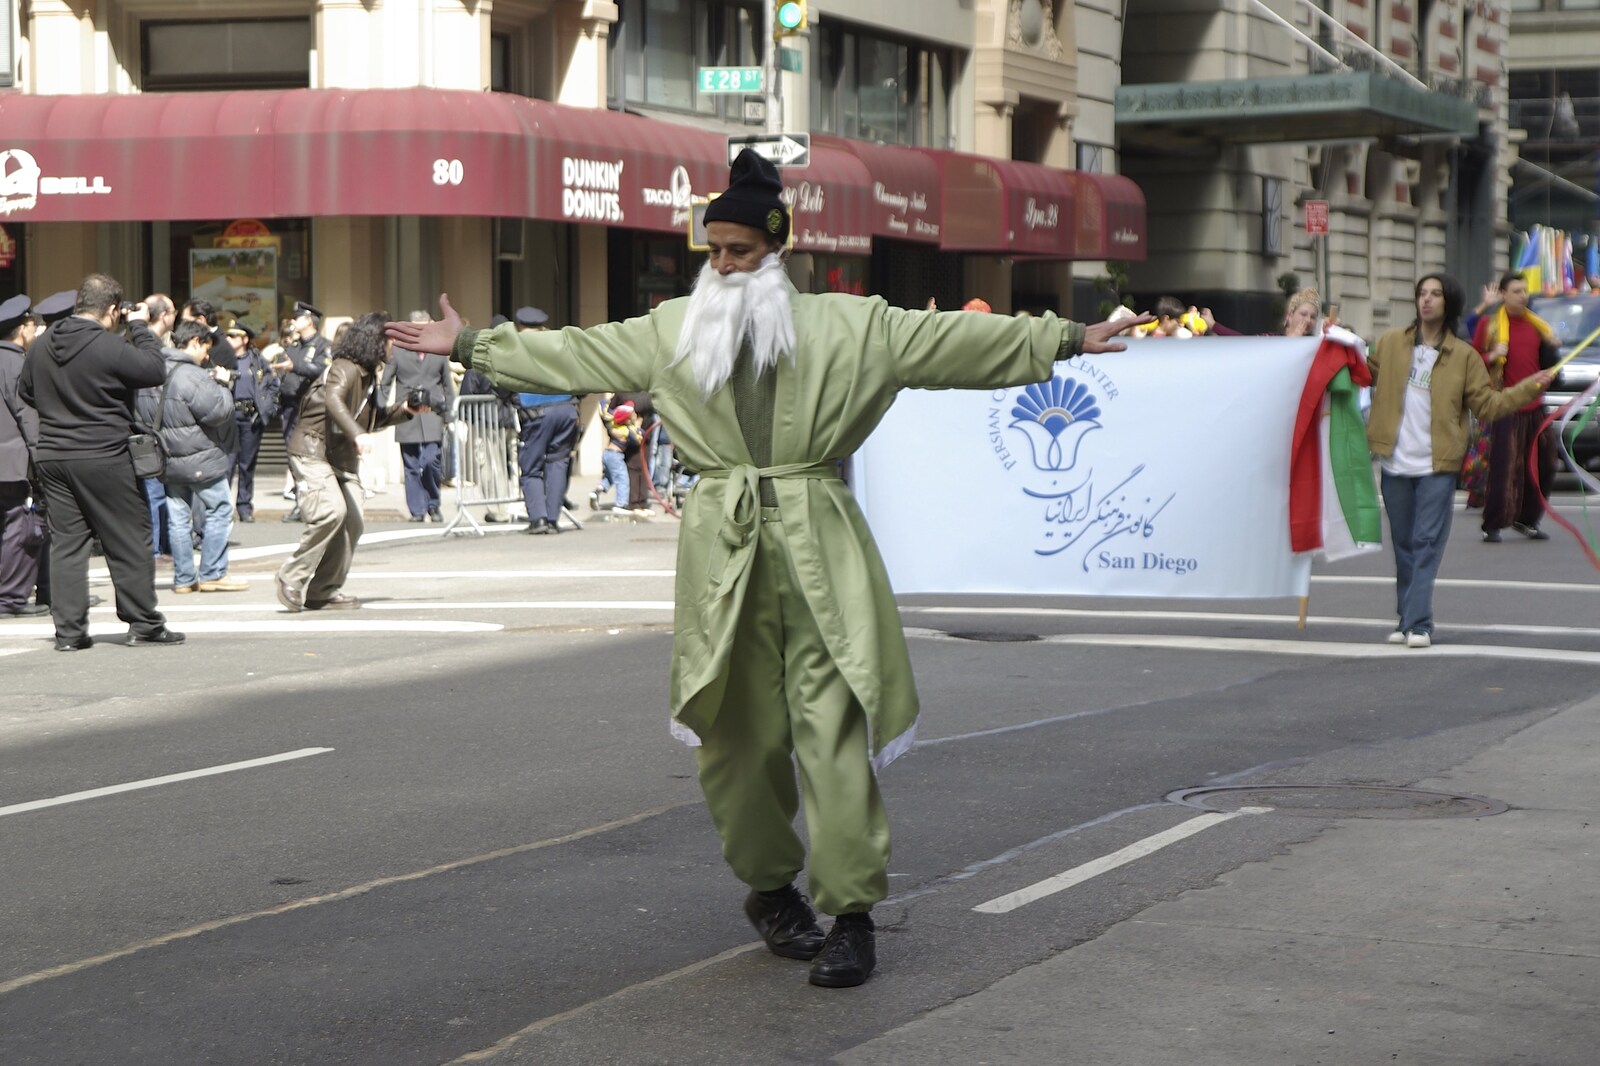 Persian Day Parade, Upper East Side and Midtown, New York, US - 25th March 2007: A dude in a fake beard